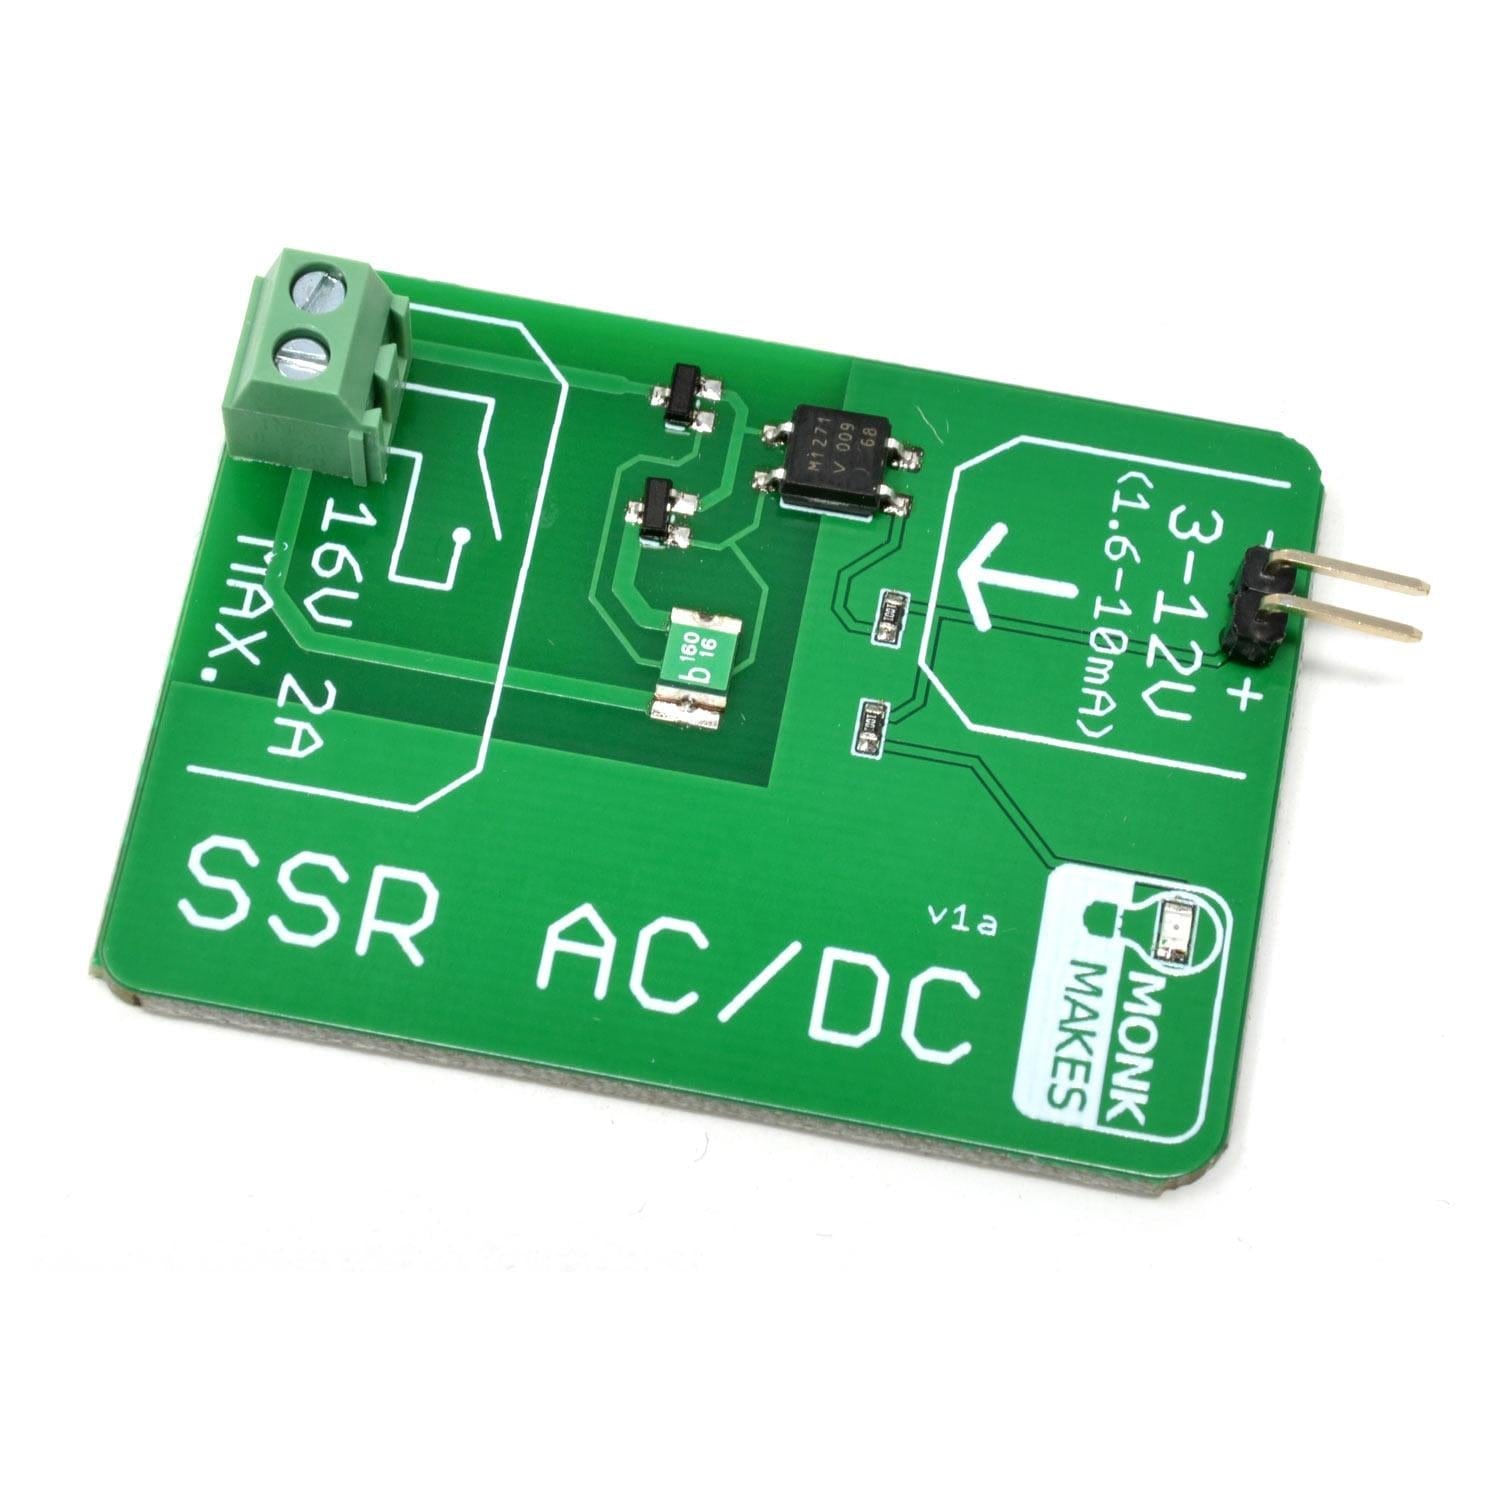 MonkMakes Solid State Relay Board - The Pi Hut